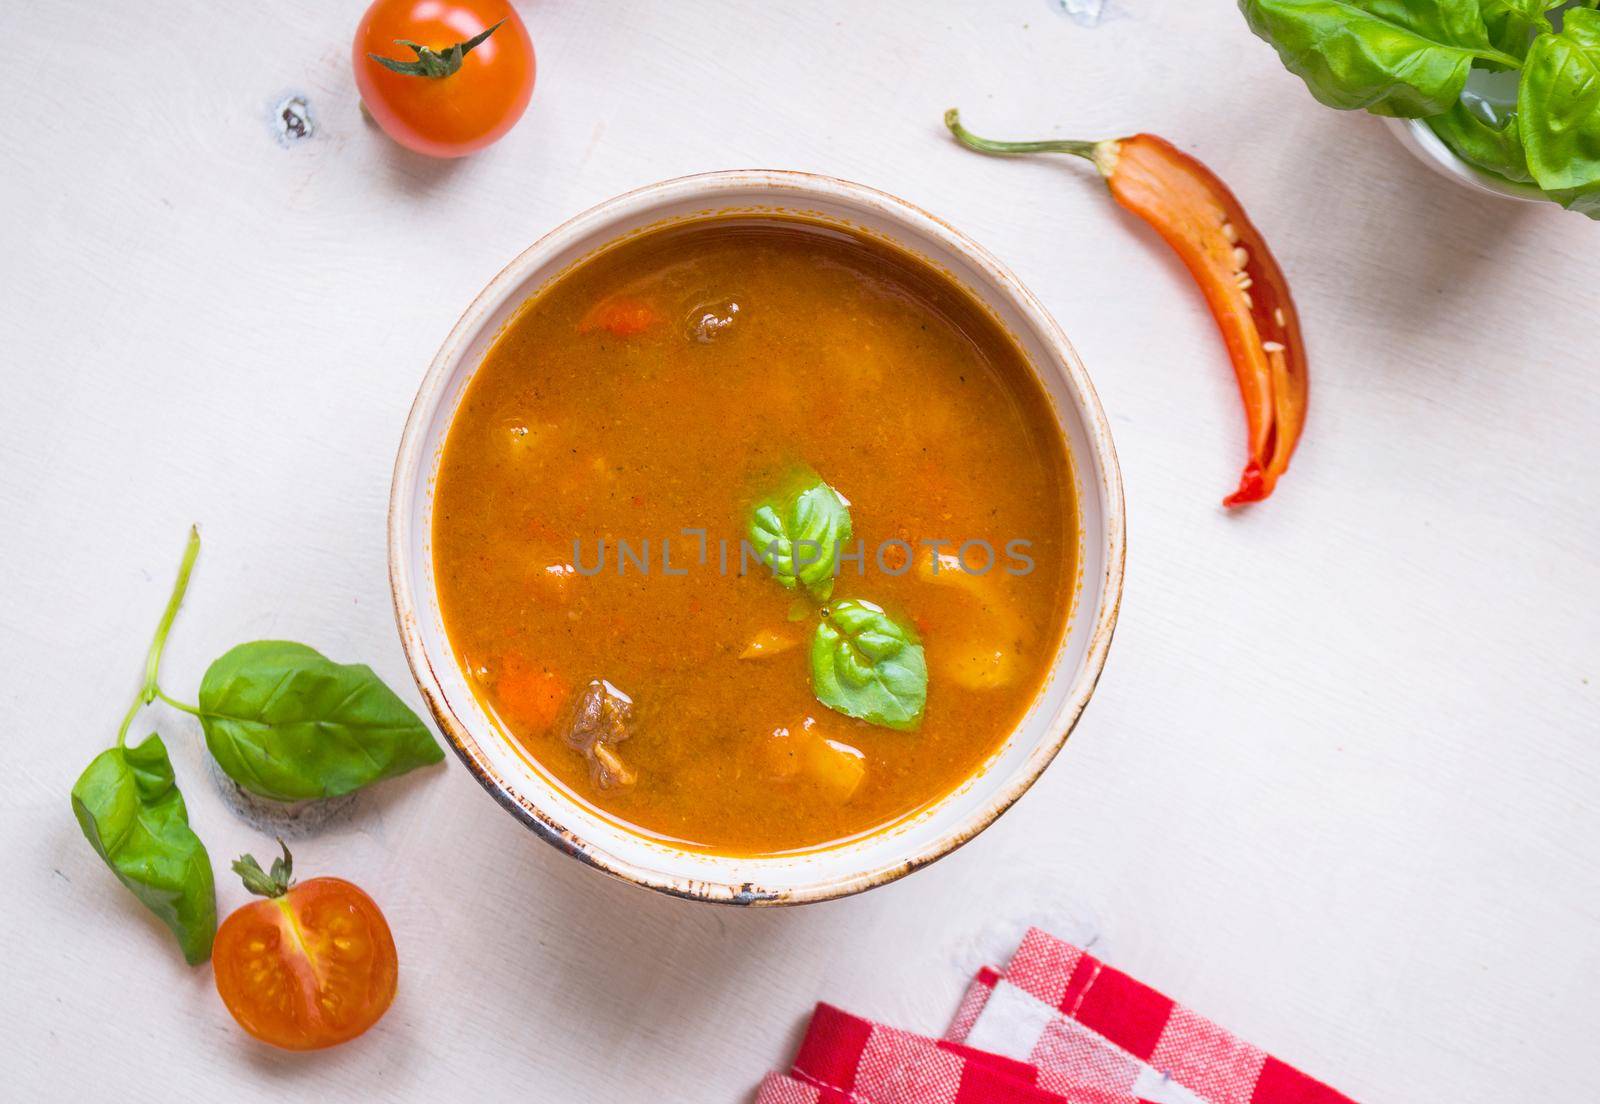 Delicious tomato soup with meat in a white bowl on a wooden table with fresh cherry tomatoes, basil leaves, cut chili pepper and red gingham kitchen towel. Ingredients for soup. Top view